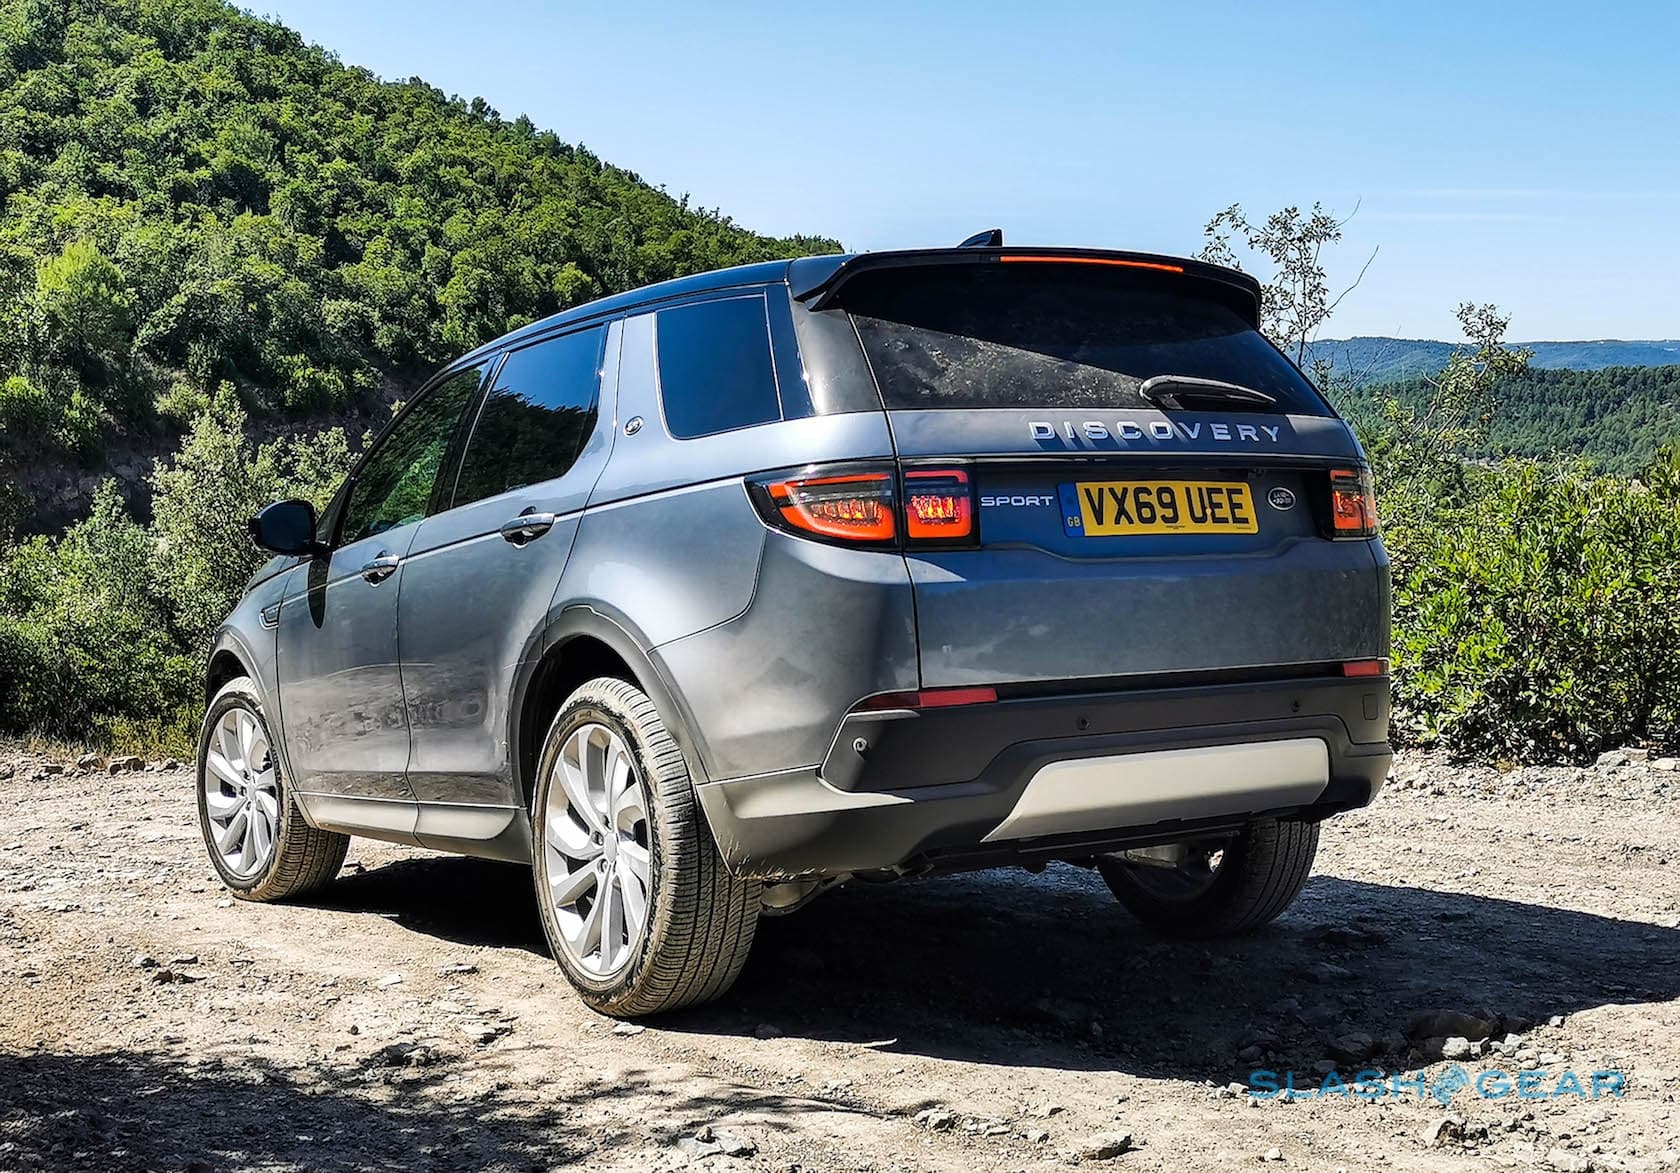 Range Rover Discovery Sport Se 2020  - The Land Rover Discovery Sport Enters The New Year With Refreshed Styling That Remains True To The Rugged Good Looks It Has Always Boasted.